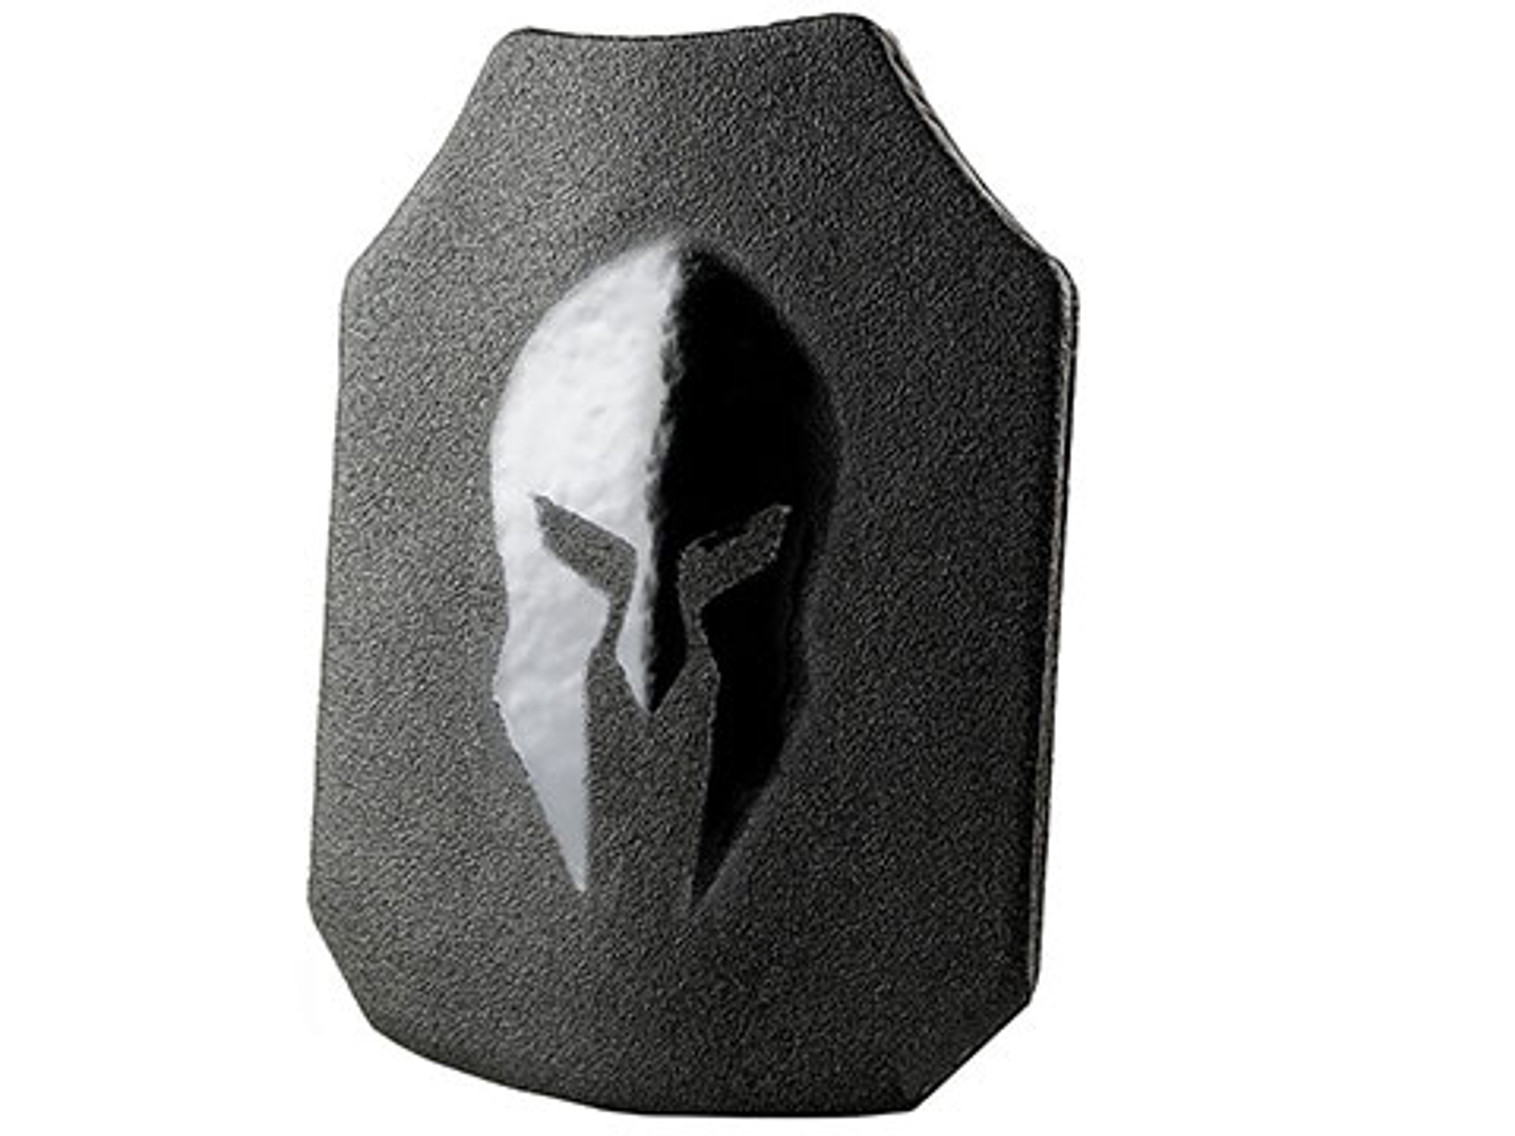 Spartan Armor Systems AR550 Level III+ Steel Core Body Armor Plate (Model: Shooters Cut - Single Curve w/ Full Coat / 11x14 / Set of Two)